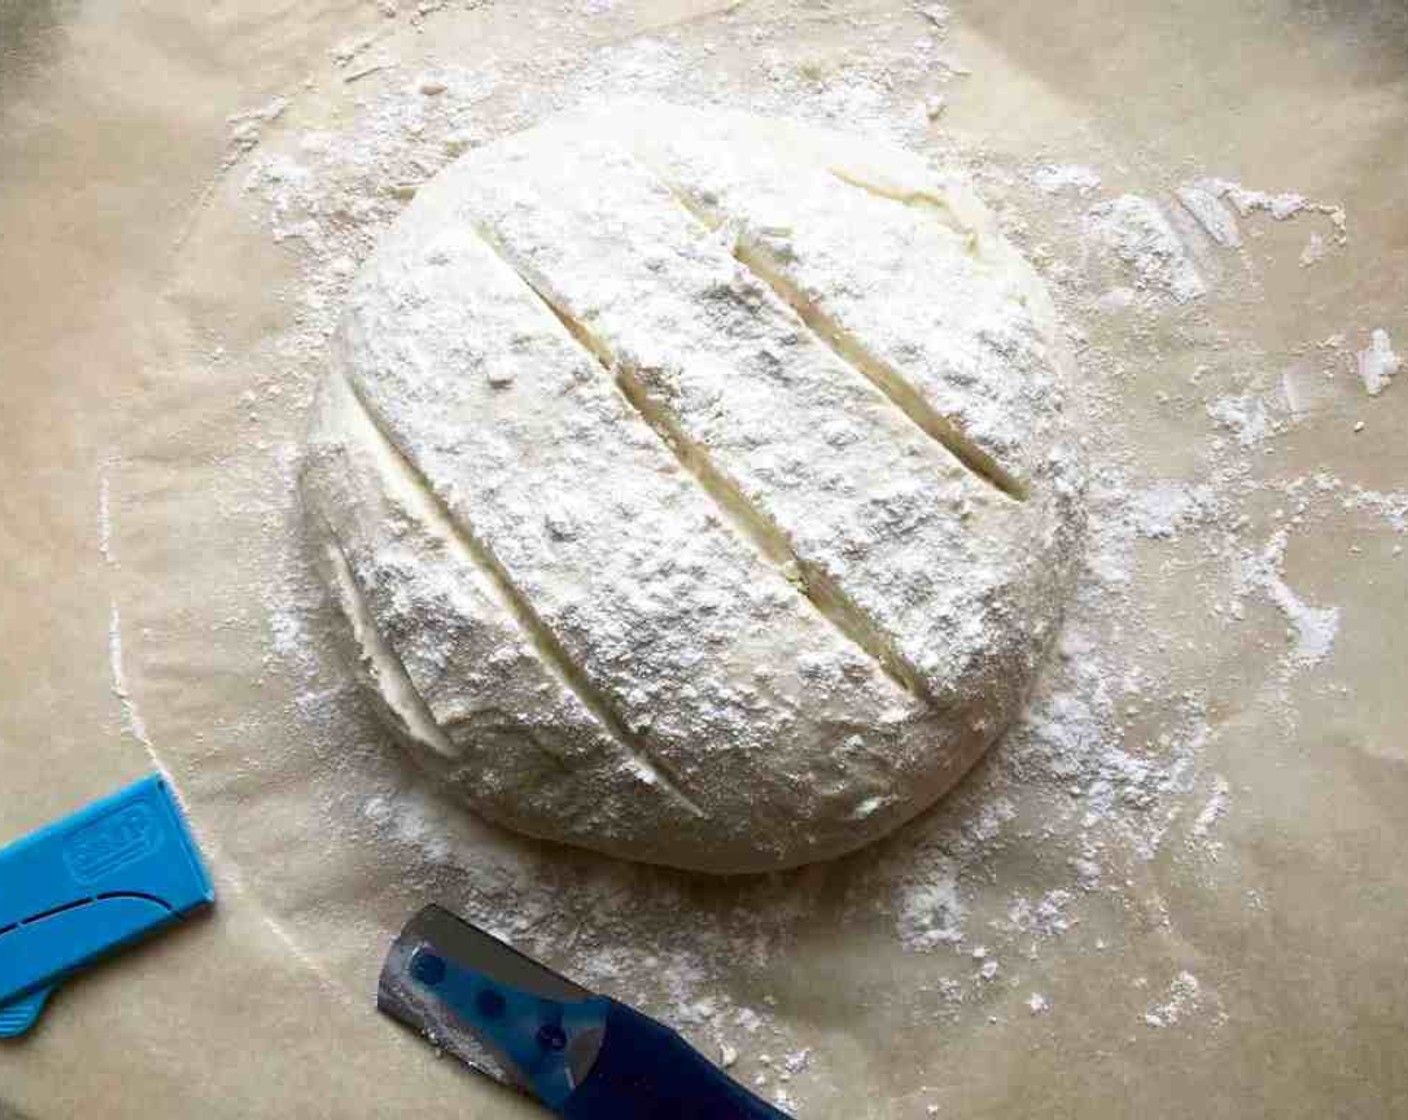 step 13 Just before baking, dust the top of the loaf generously with flour. (That will prevent the knife from sticking.) Slash a half-inch-deep cross, tic-tac-toe pattern, or slightly curved stripes into the top. You can use the tip of a serrated bread knife or a bread lame for slashing your markings. Leave the excess flour in place for baking; it can be brushed off before serving if desired.